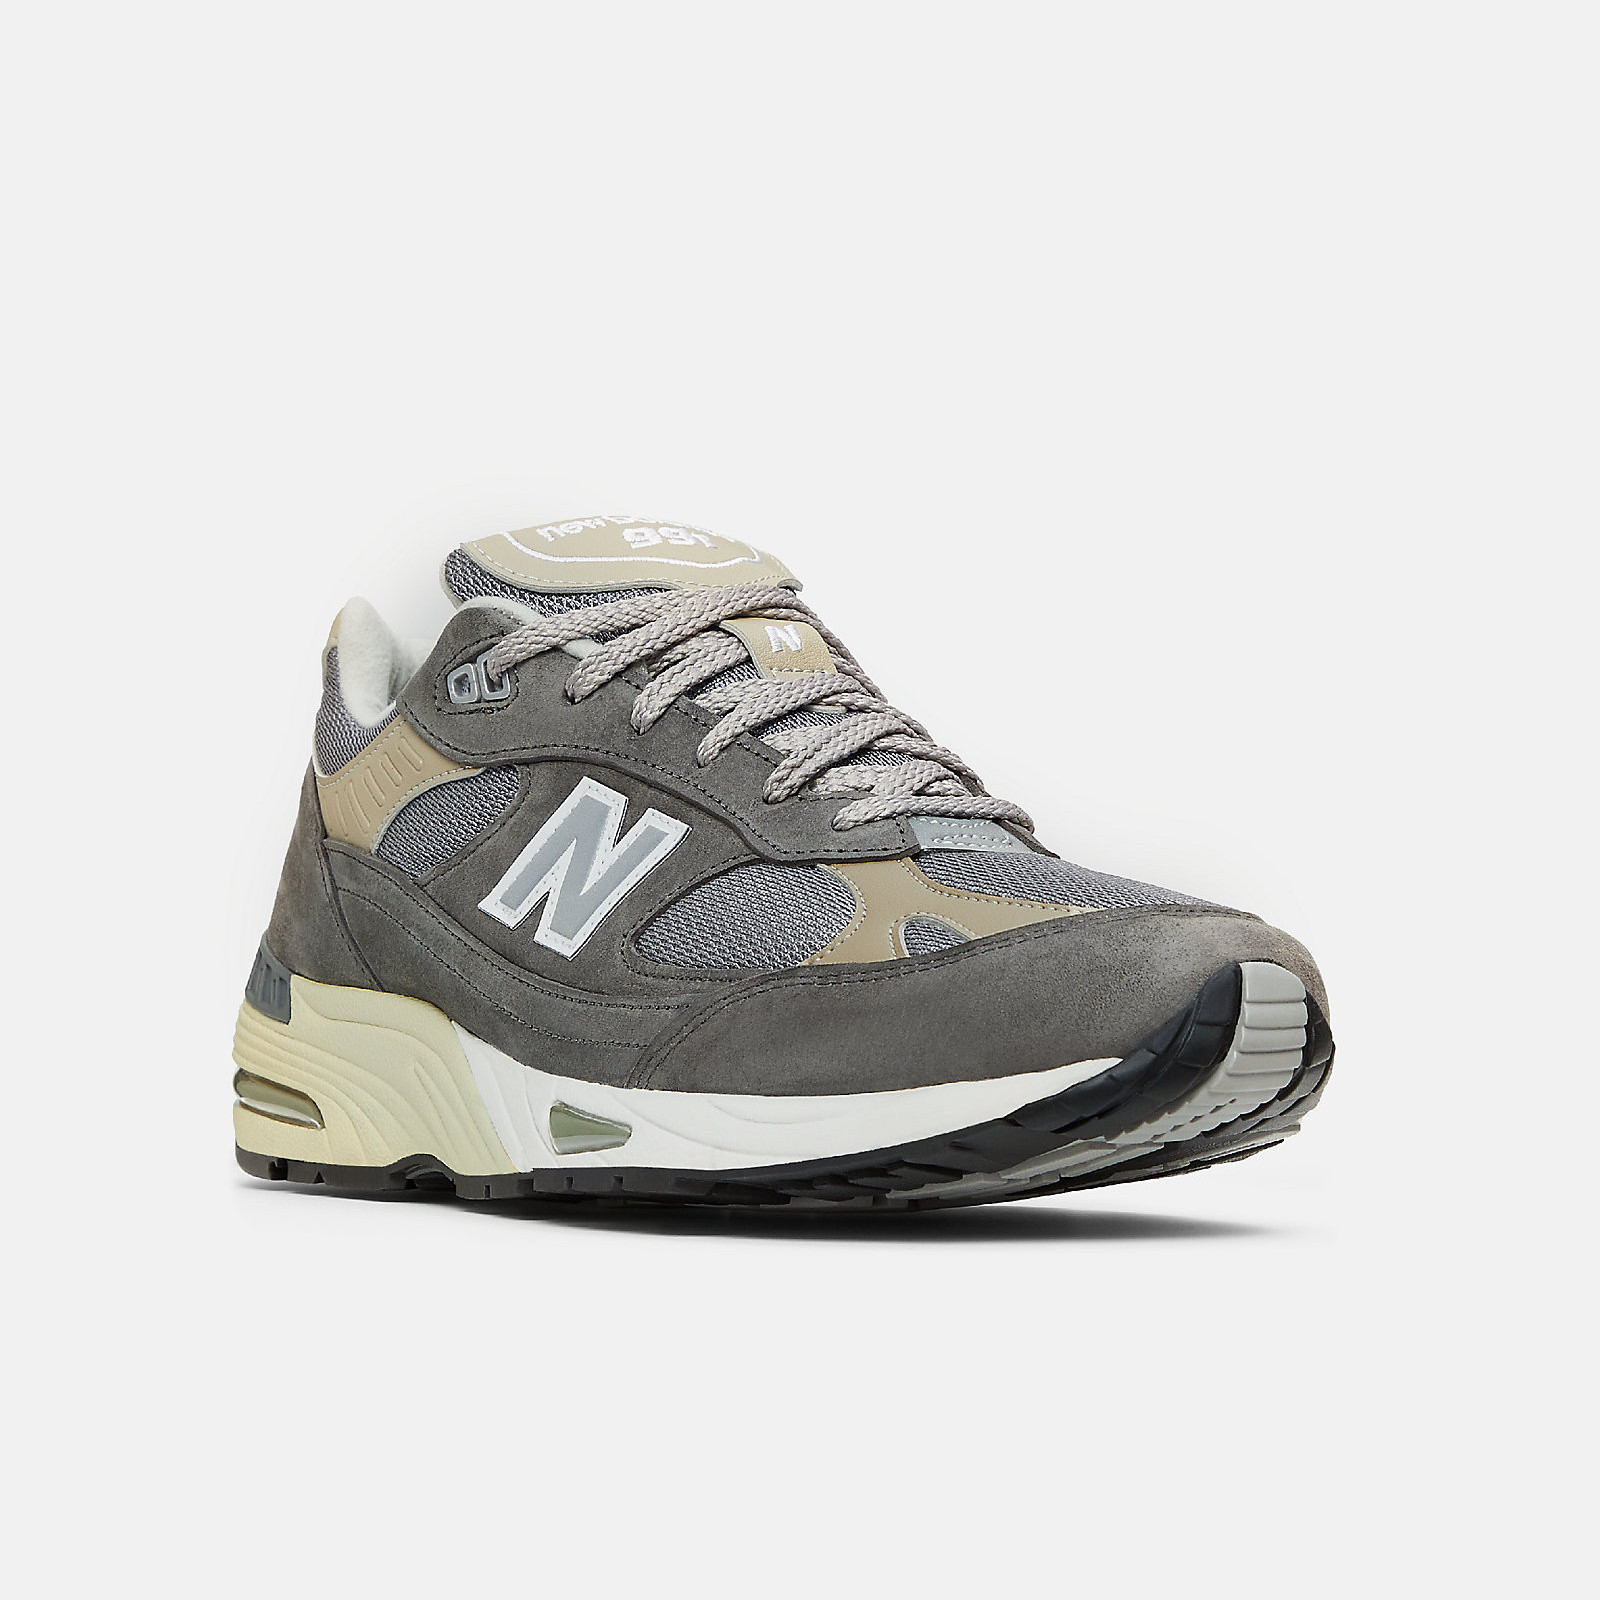 New Balance 991
Made in UK
Grey / Off-White